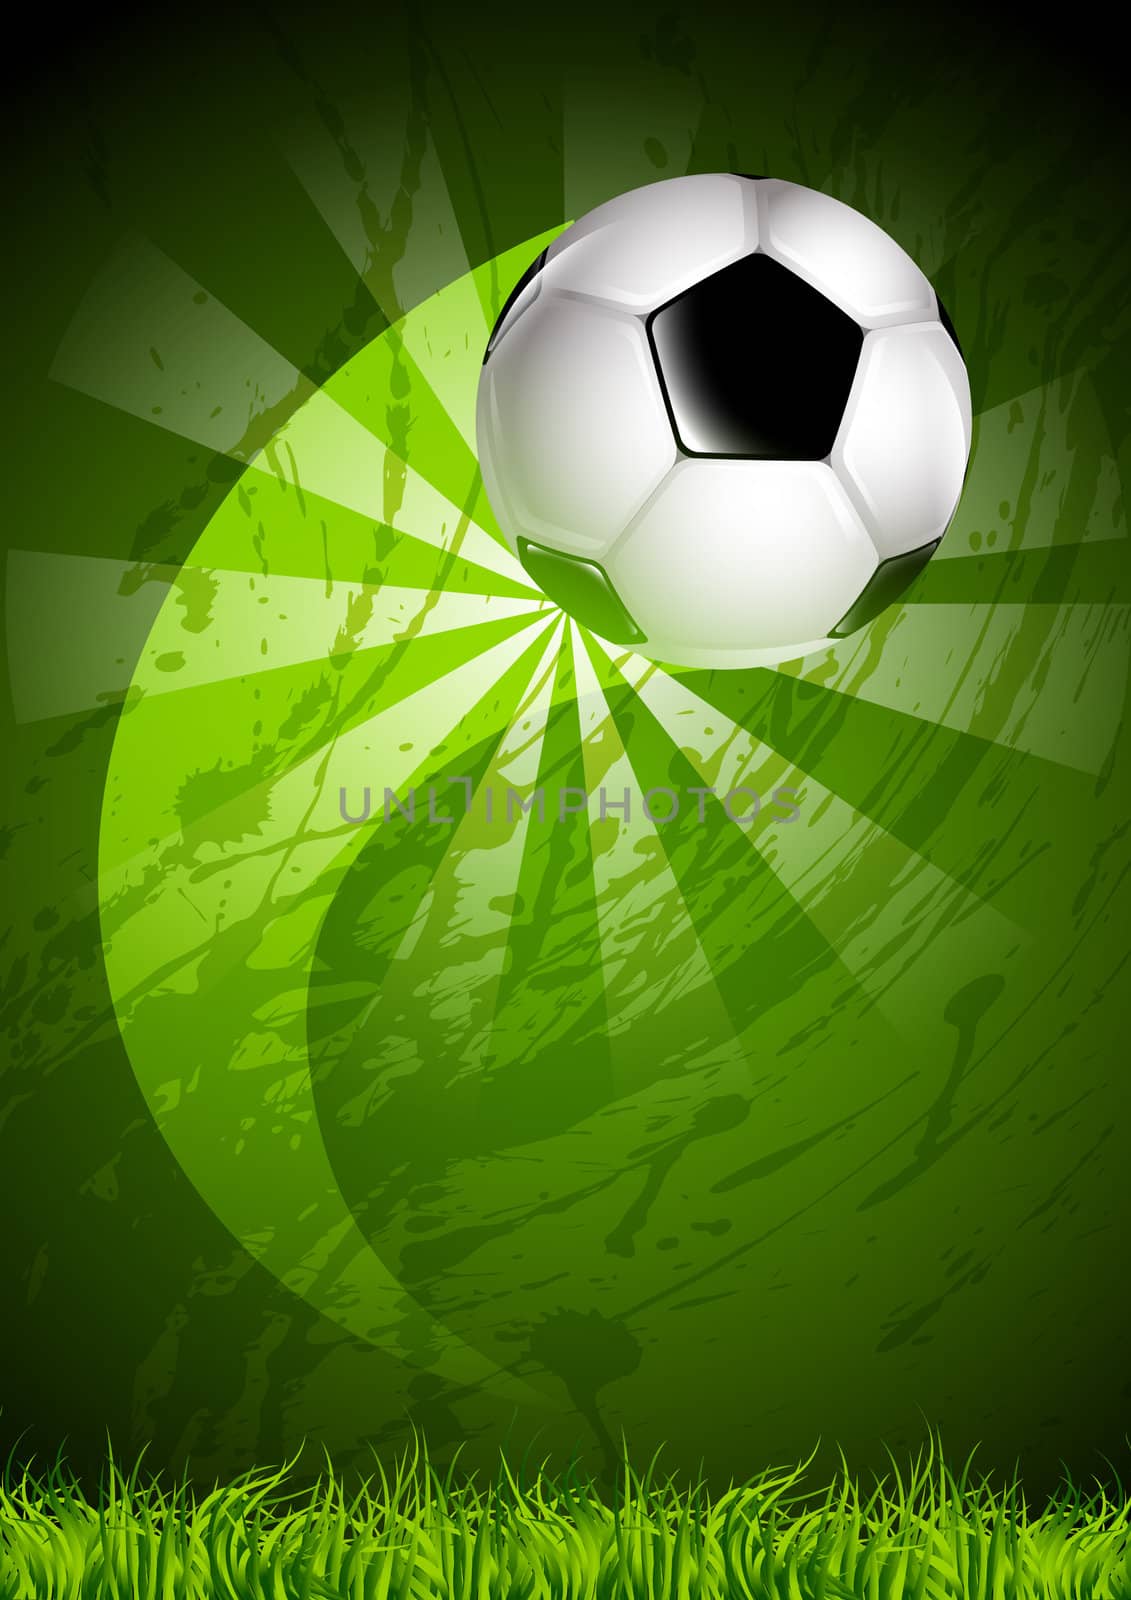 Soccer ball, flying over the curved trajectory, on a dirty background